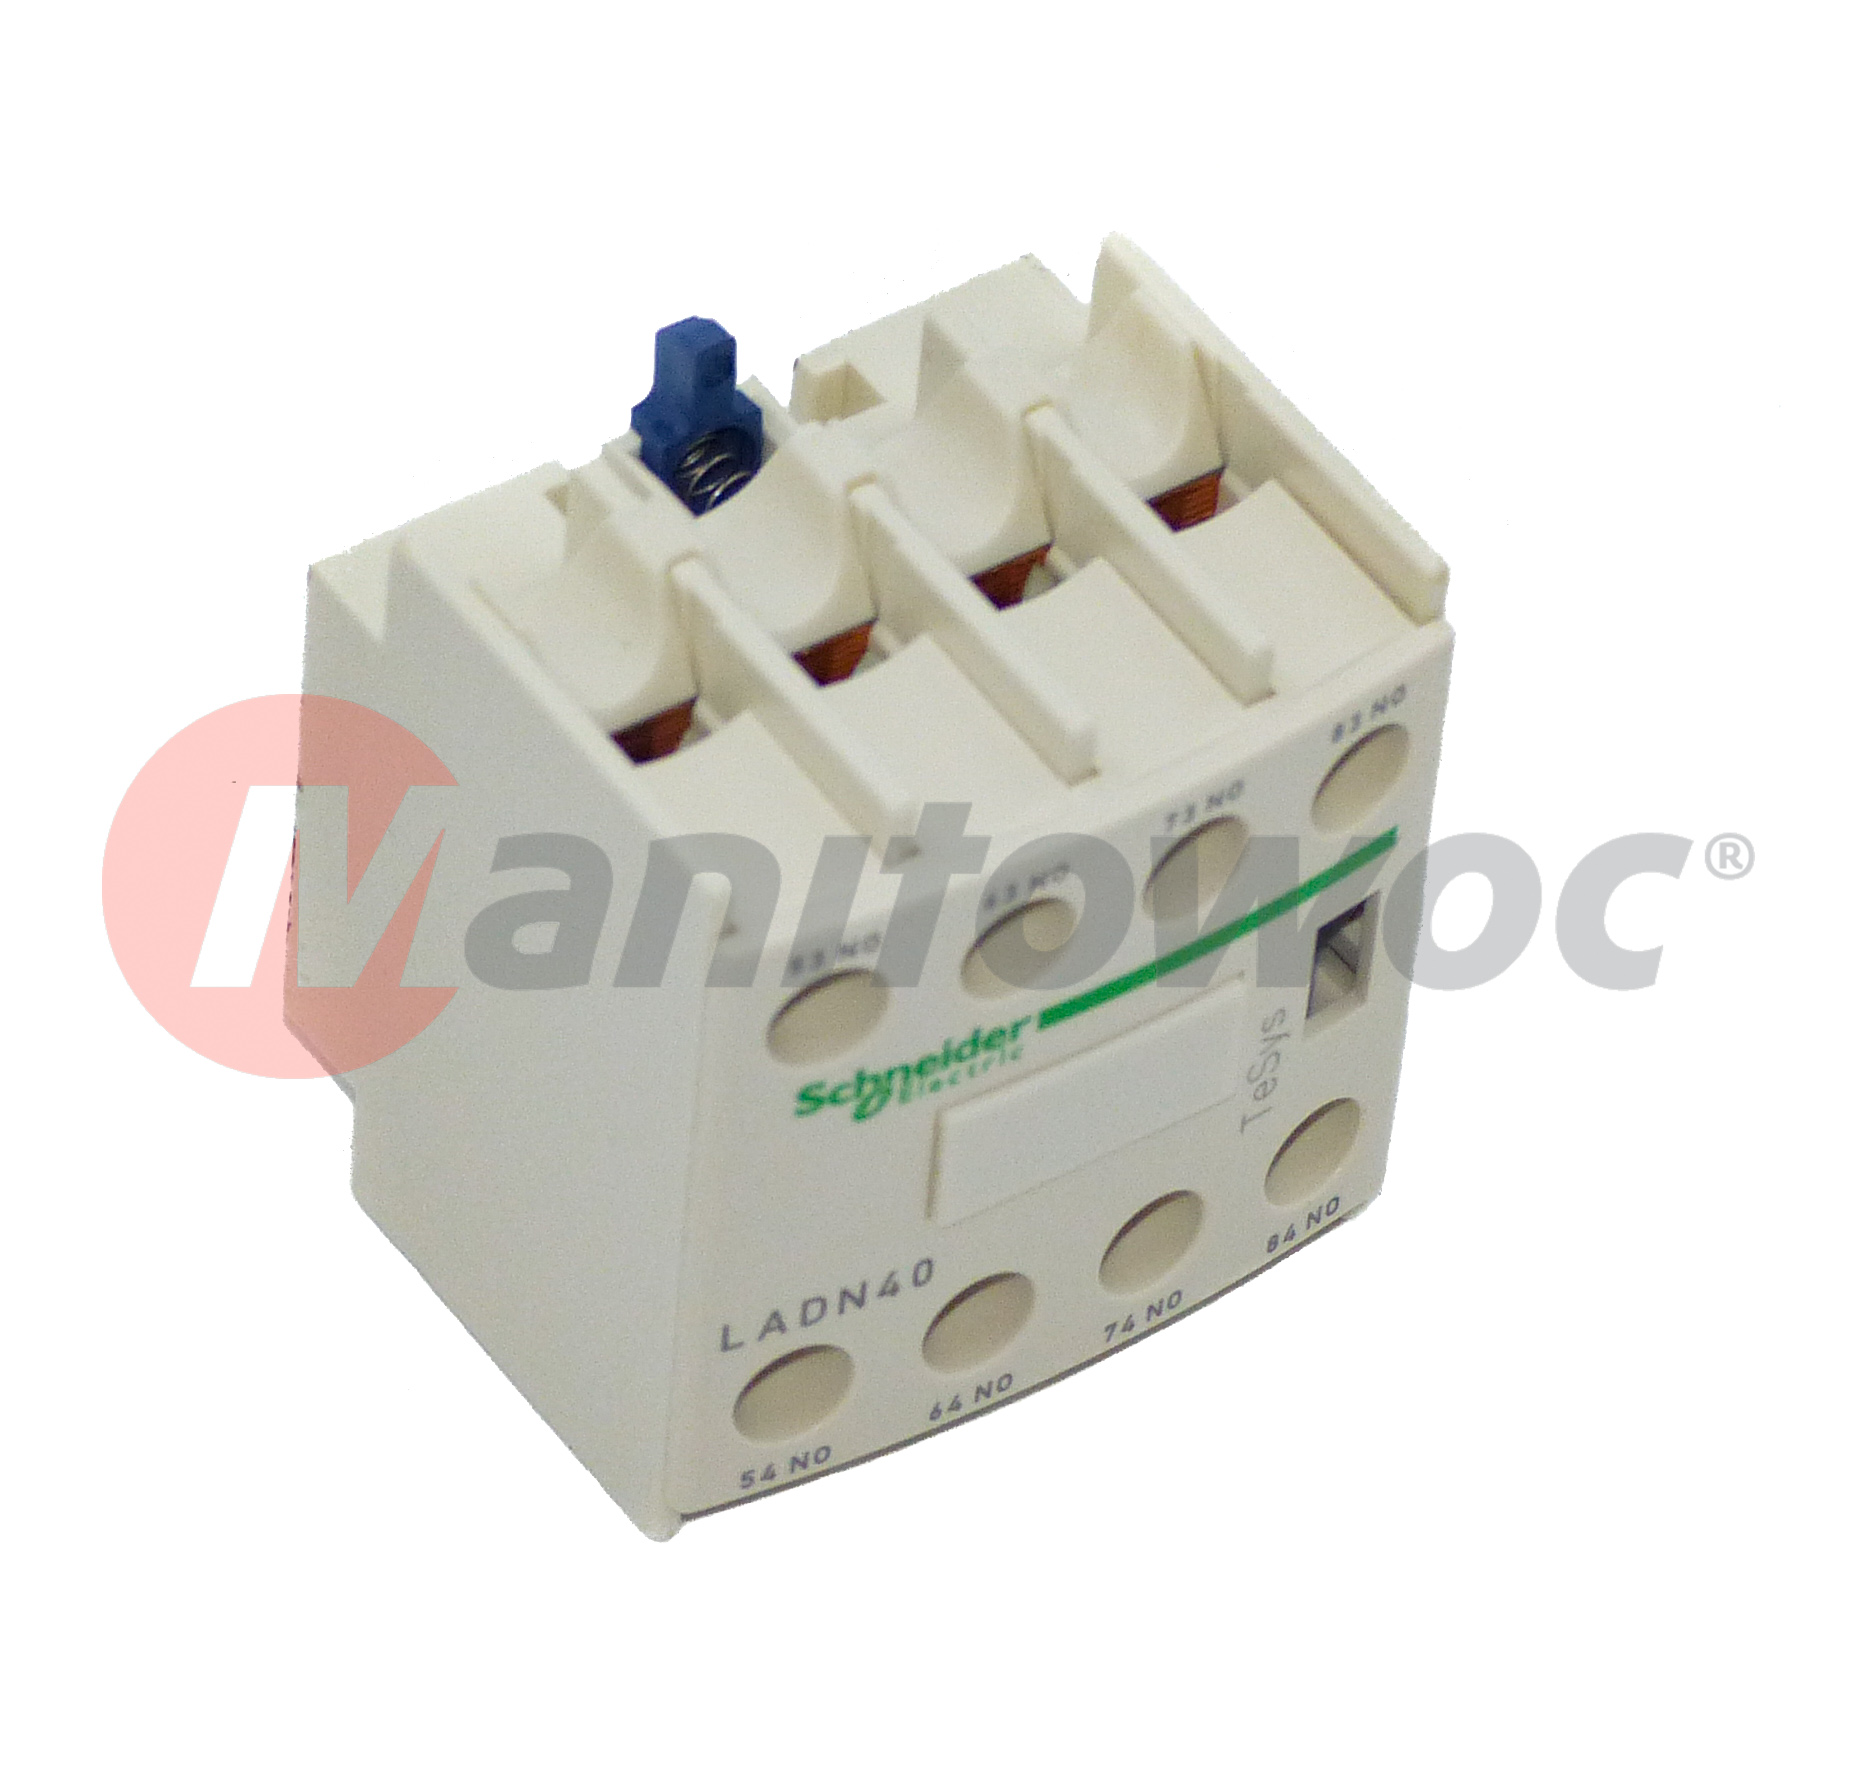 F-04411-45 - "AUXILIARY BLOCK|2F+20 FRONT"